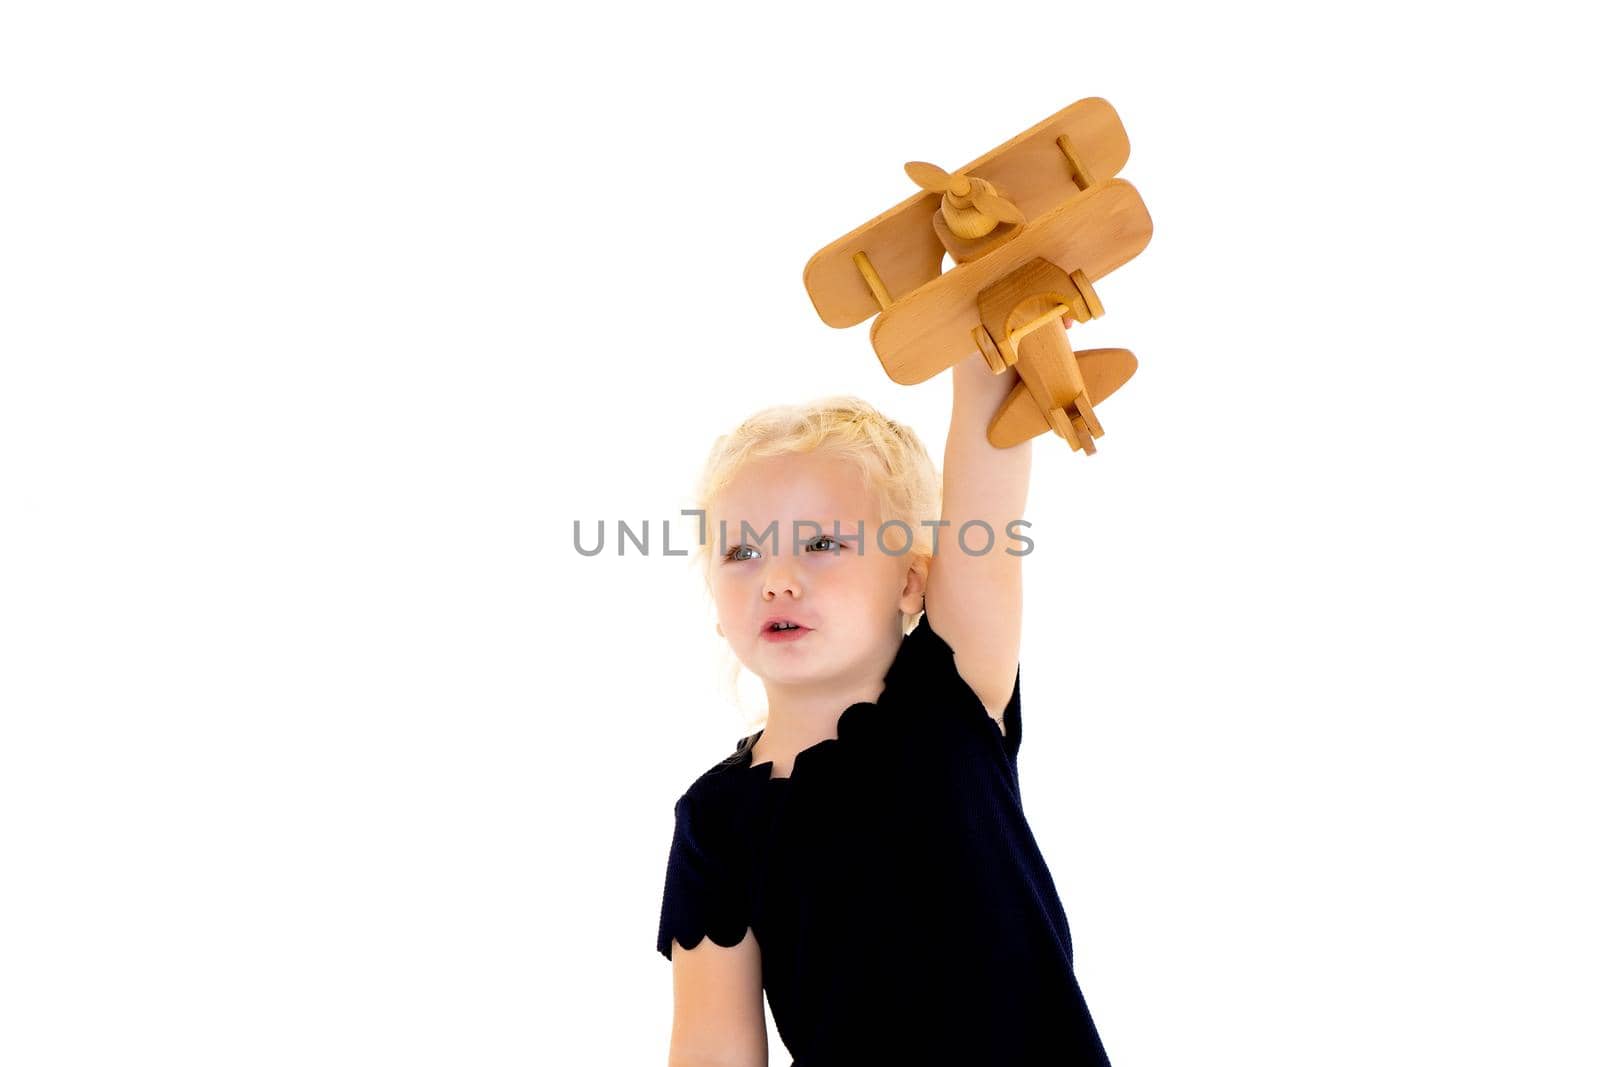 Happy little girl is playing with a wooden plane in the studio on a white background. The concept of emotions and children's games. Isolated.